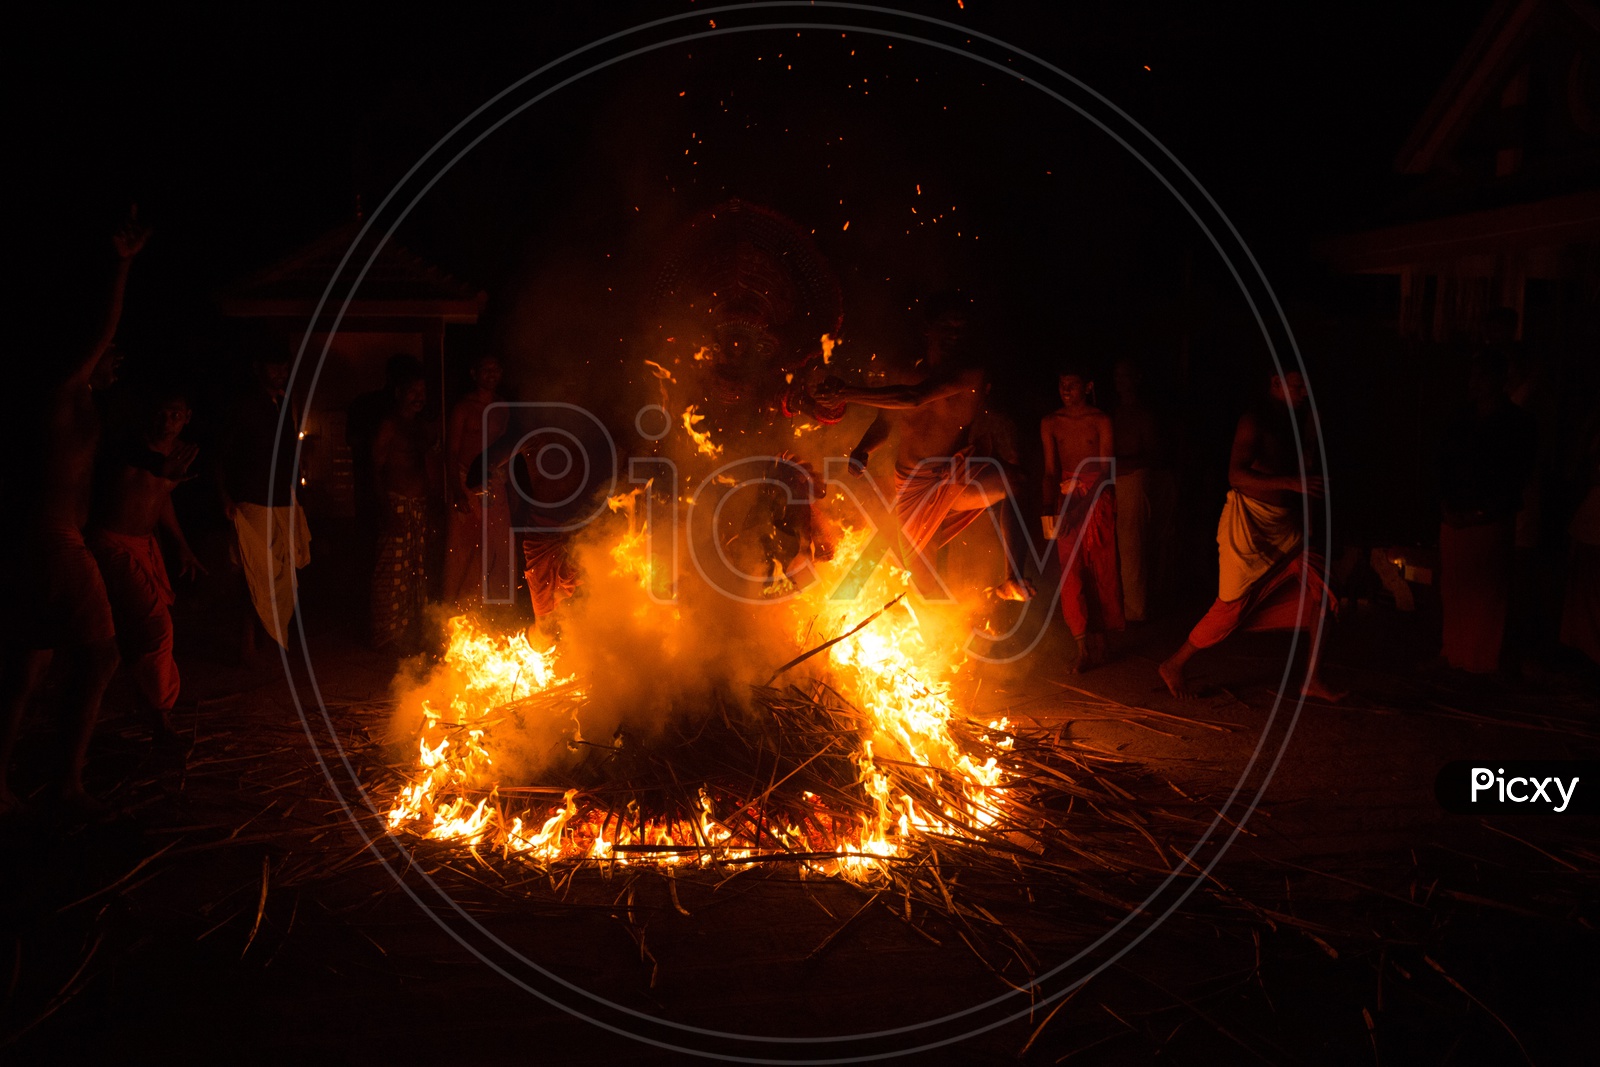 Theyyam Artists Performing Around The Fire At Bhagawathi Amman Temples As a a Ritual In Theyyam Celebrations